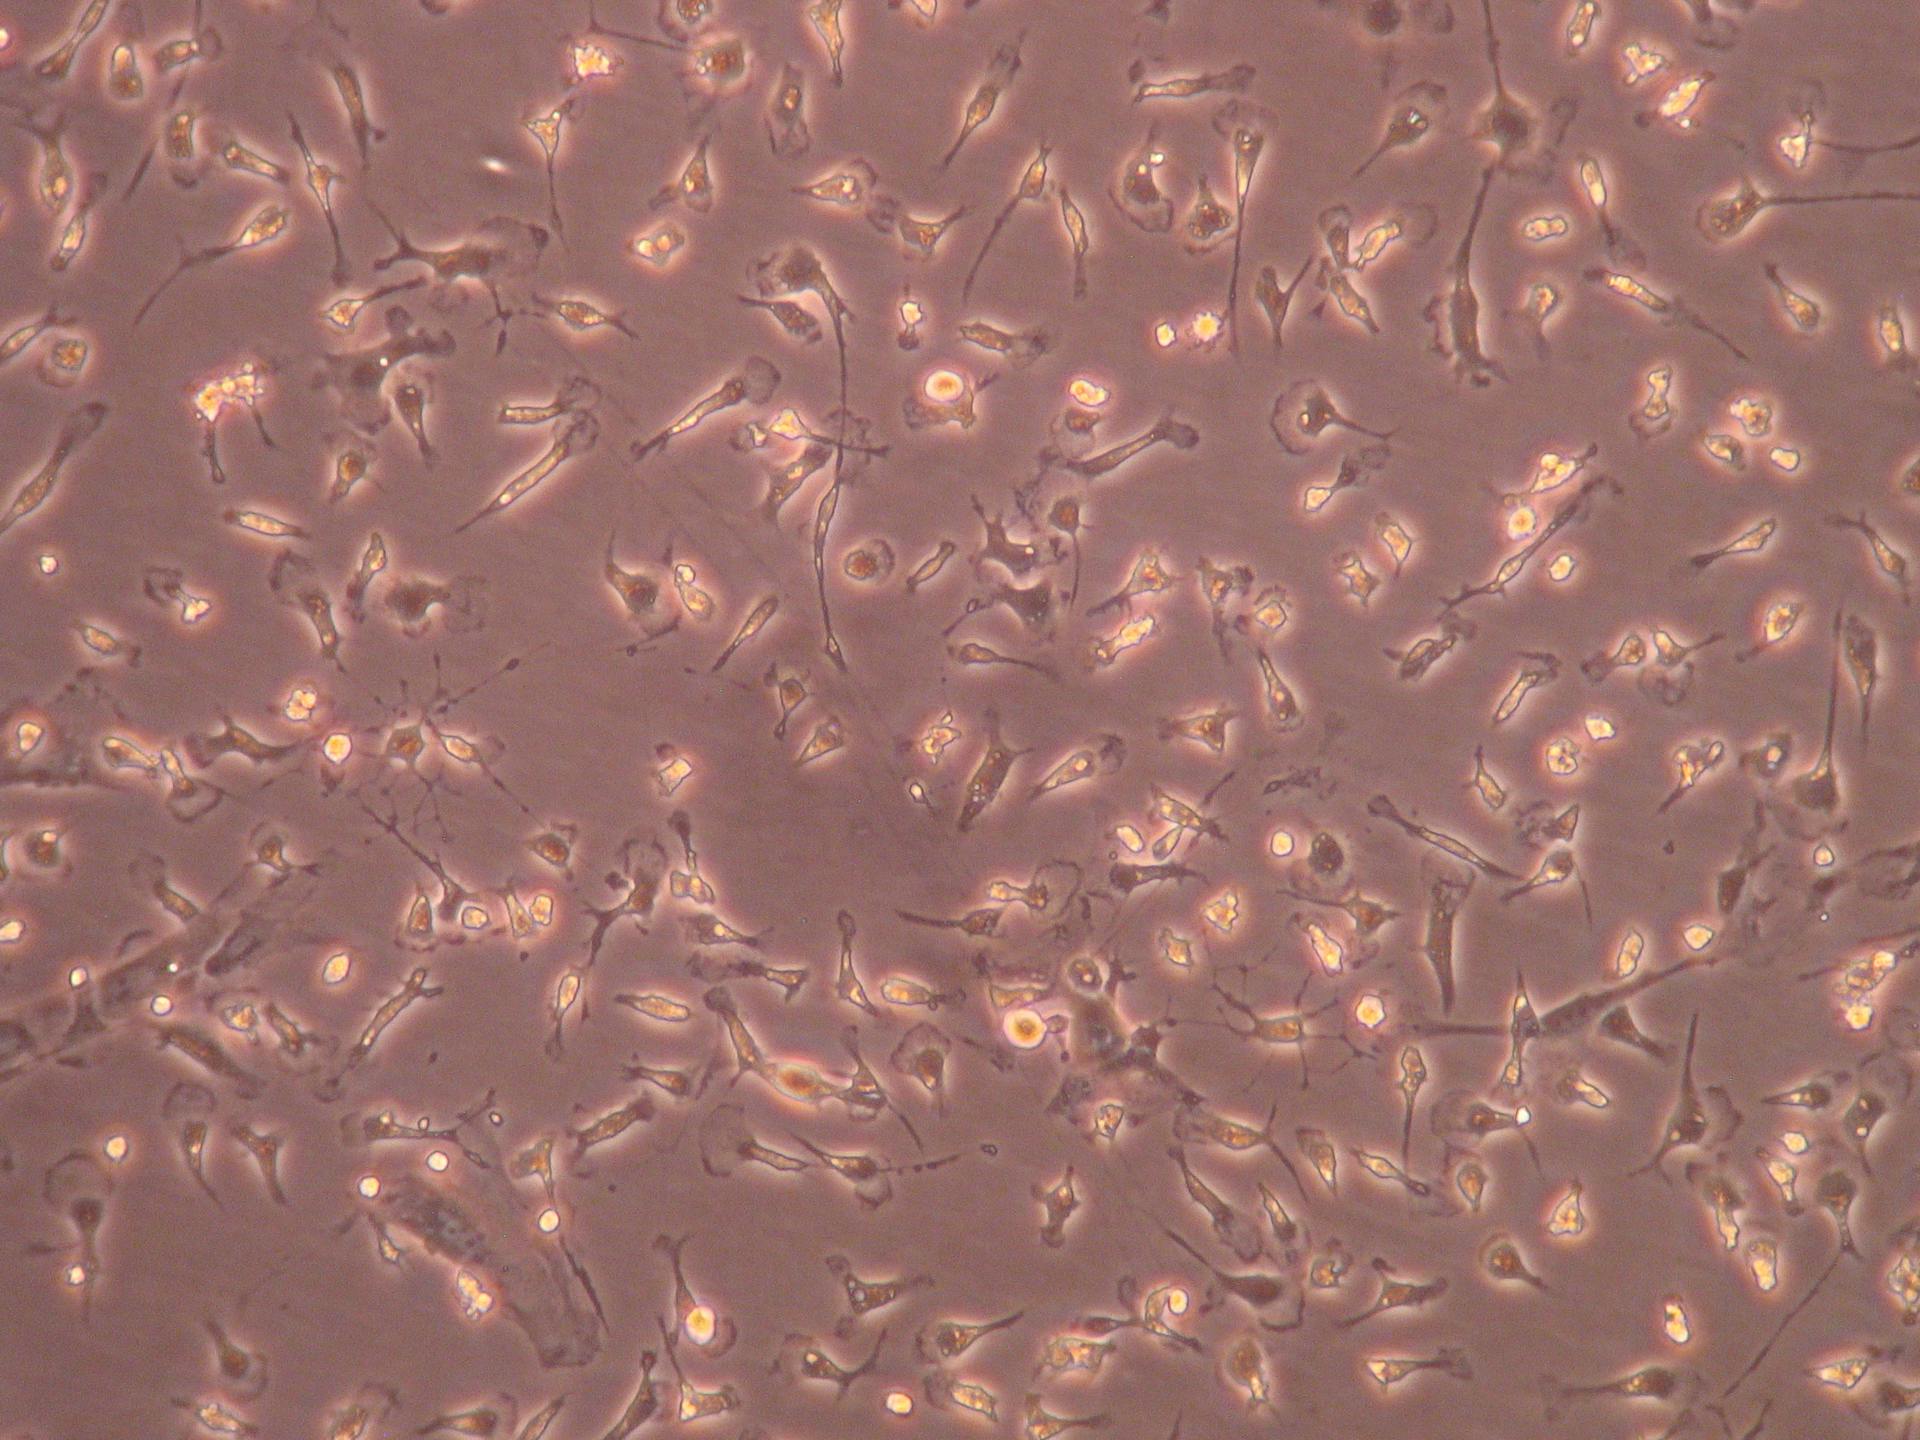 Intricately cultured microglia, extracted from a mixed glia culture of cells originally dissected out of neonatal brains.